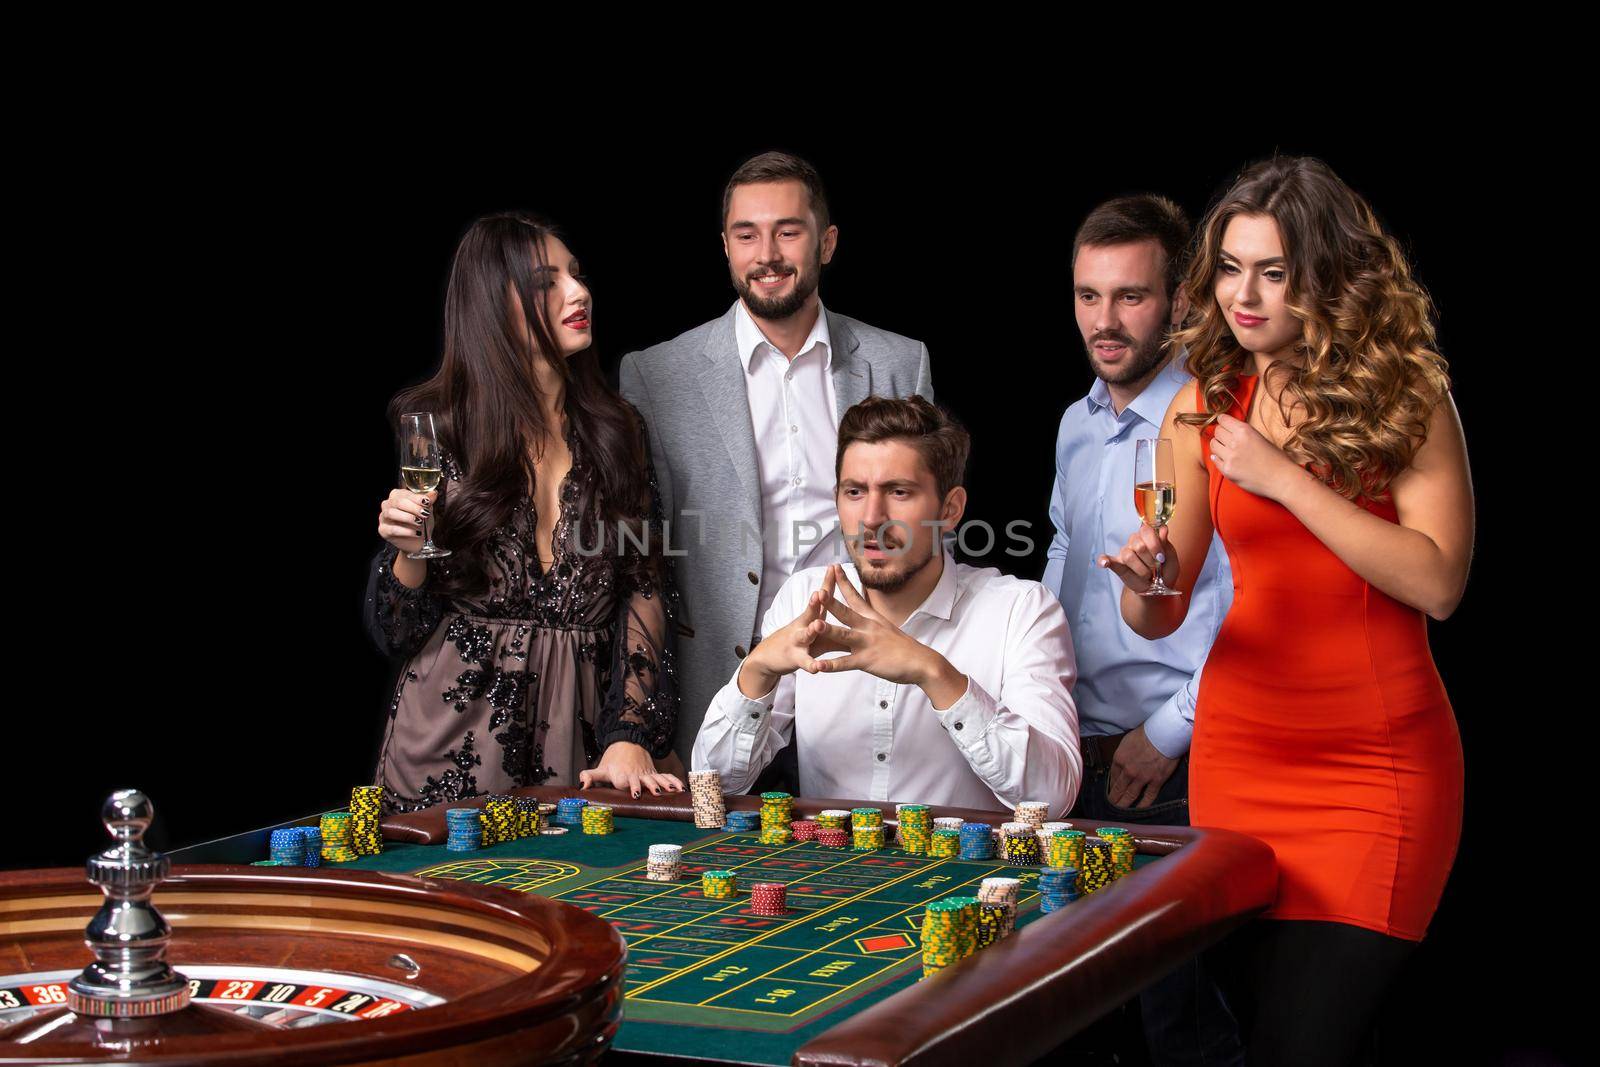 Group of young people looking excited at spinning roulette. Roulette table in a casino. Black background